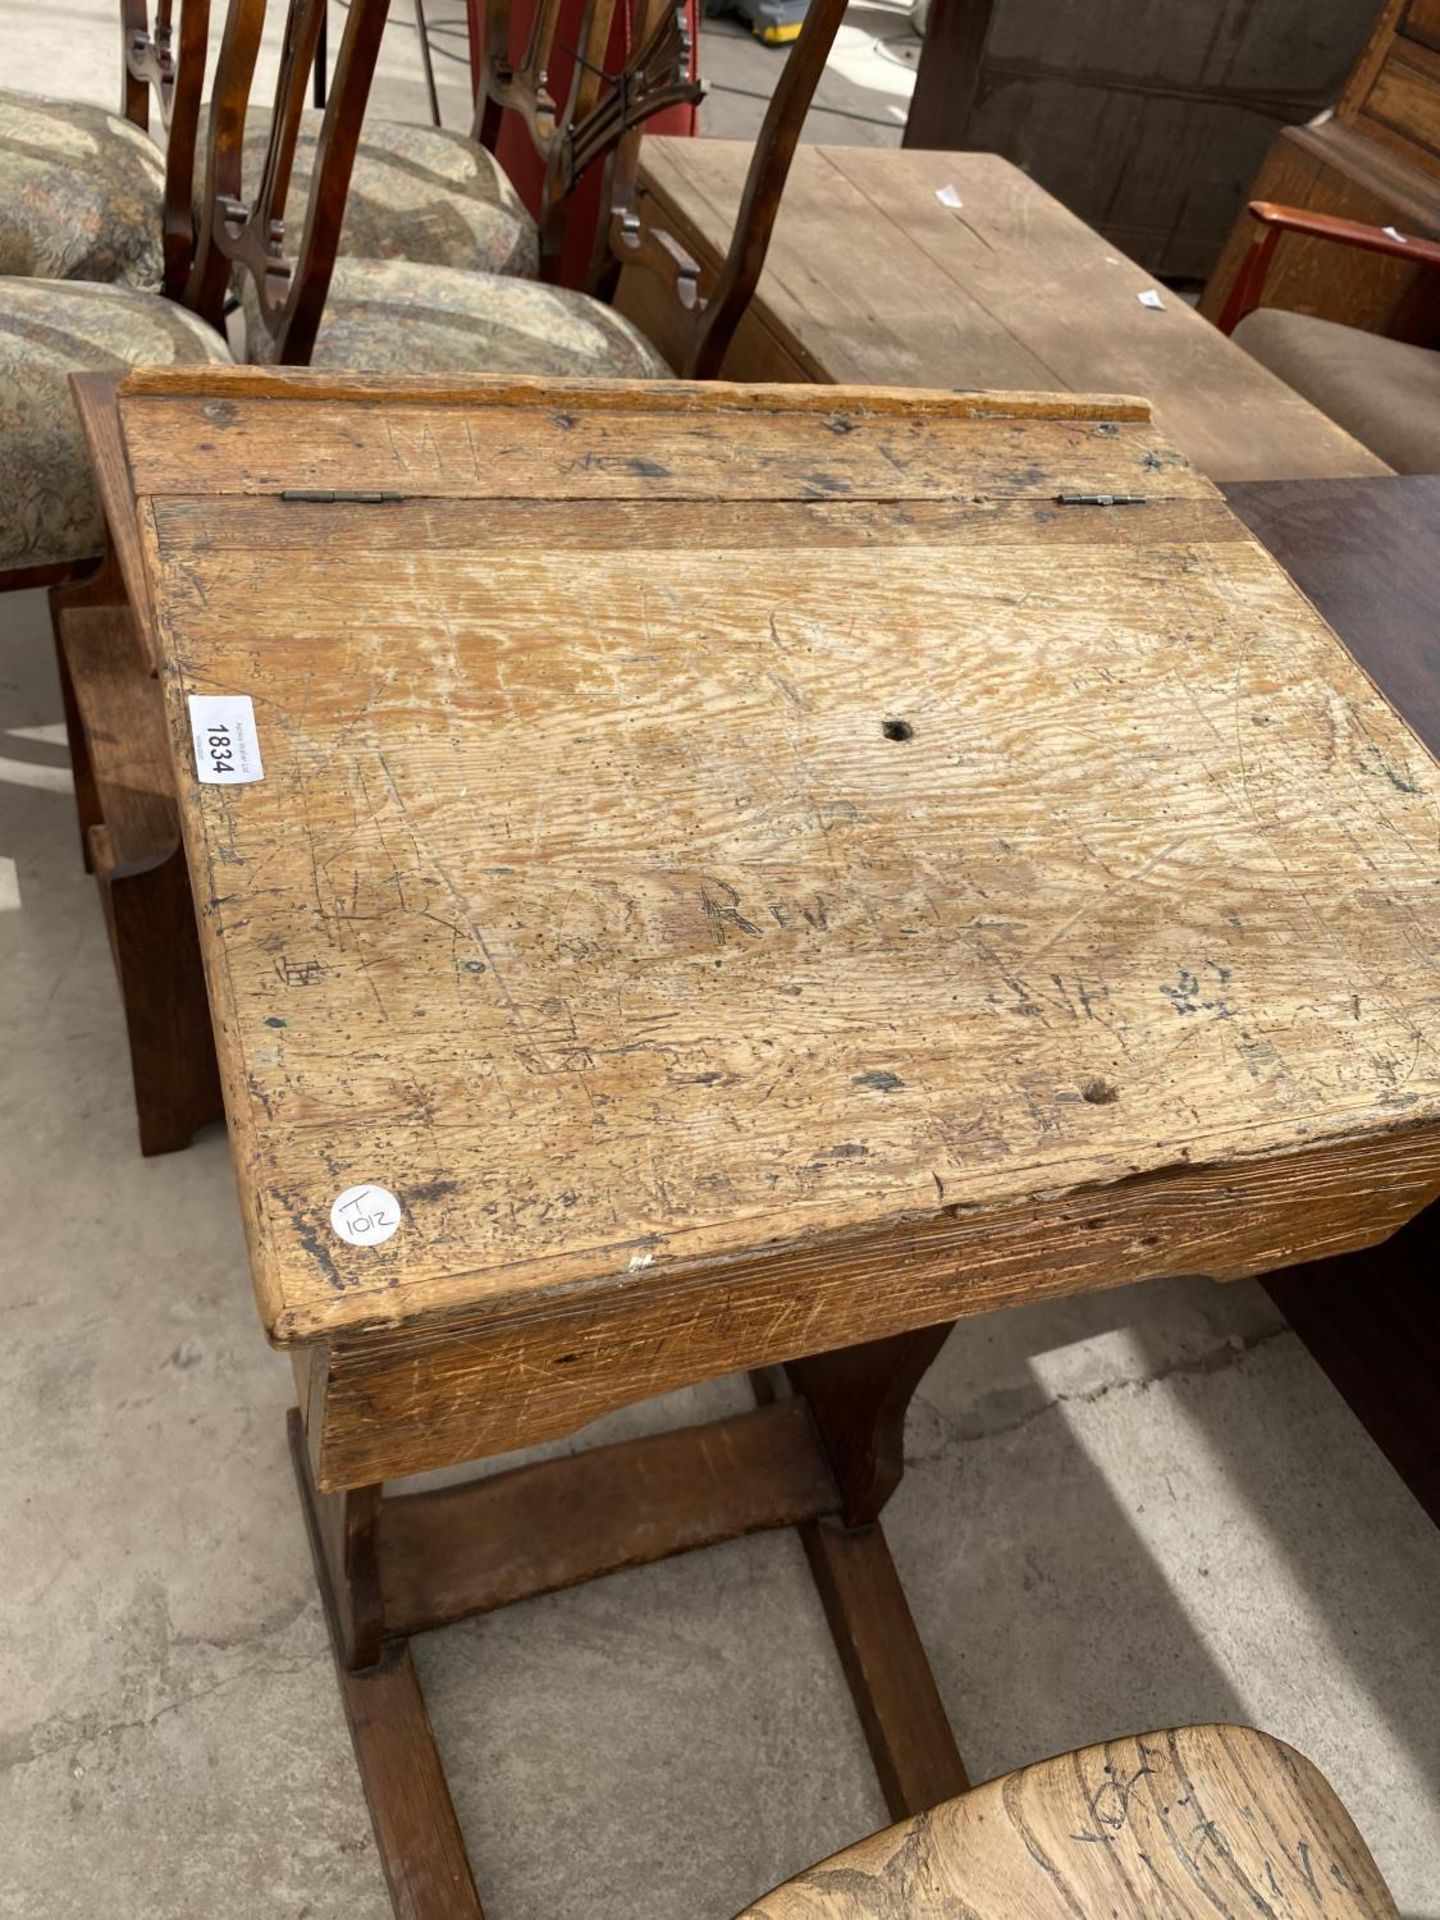 A VICTORIAN PITCH PINE SCHOOL DESK AND CHAIR - Image 2 of 4